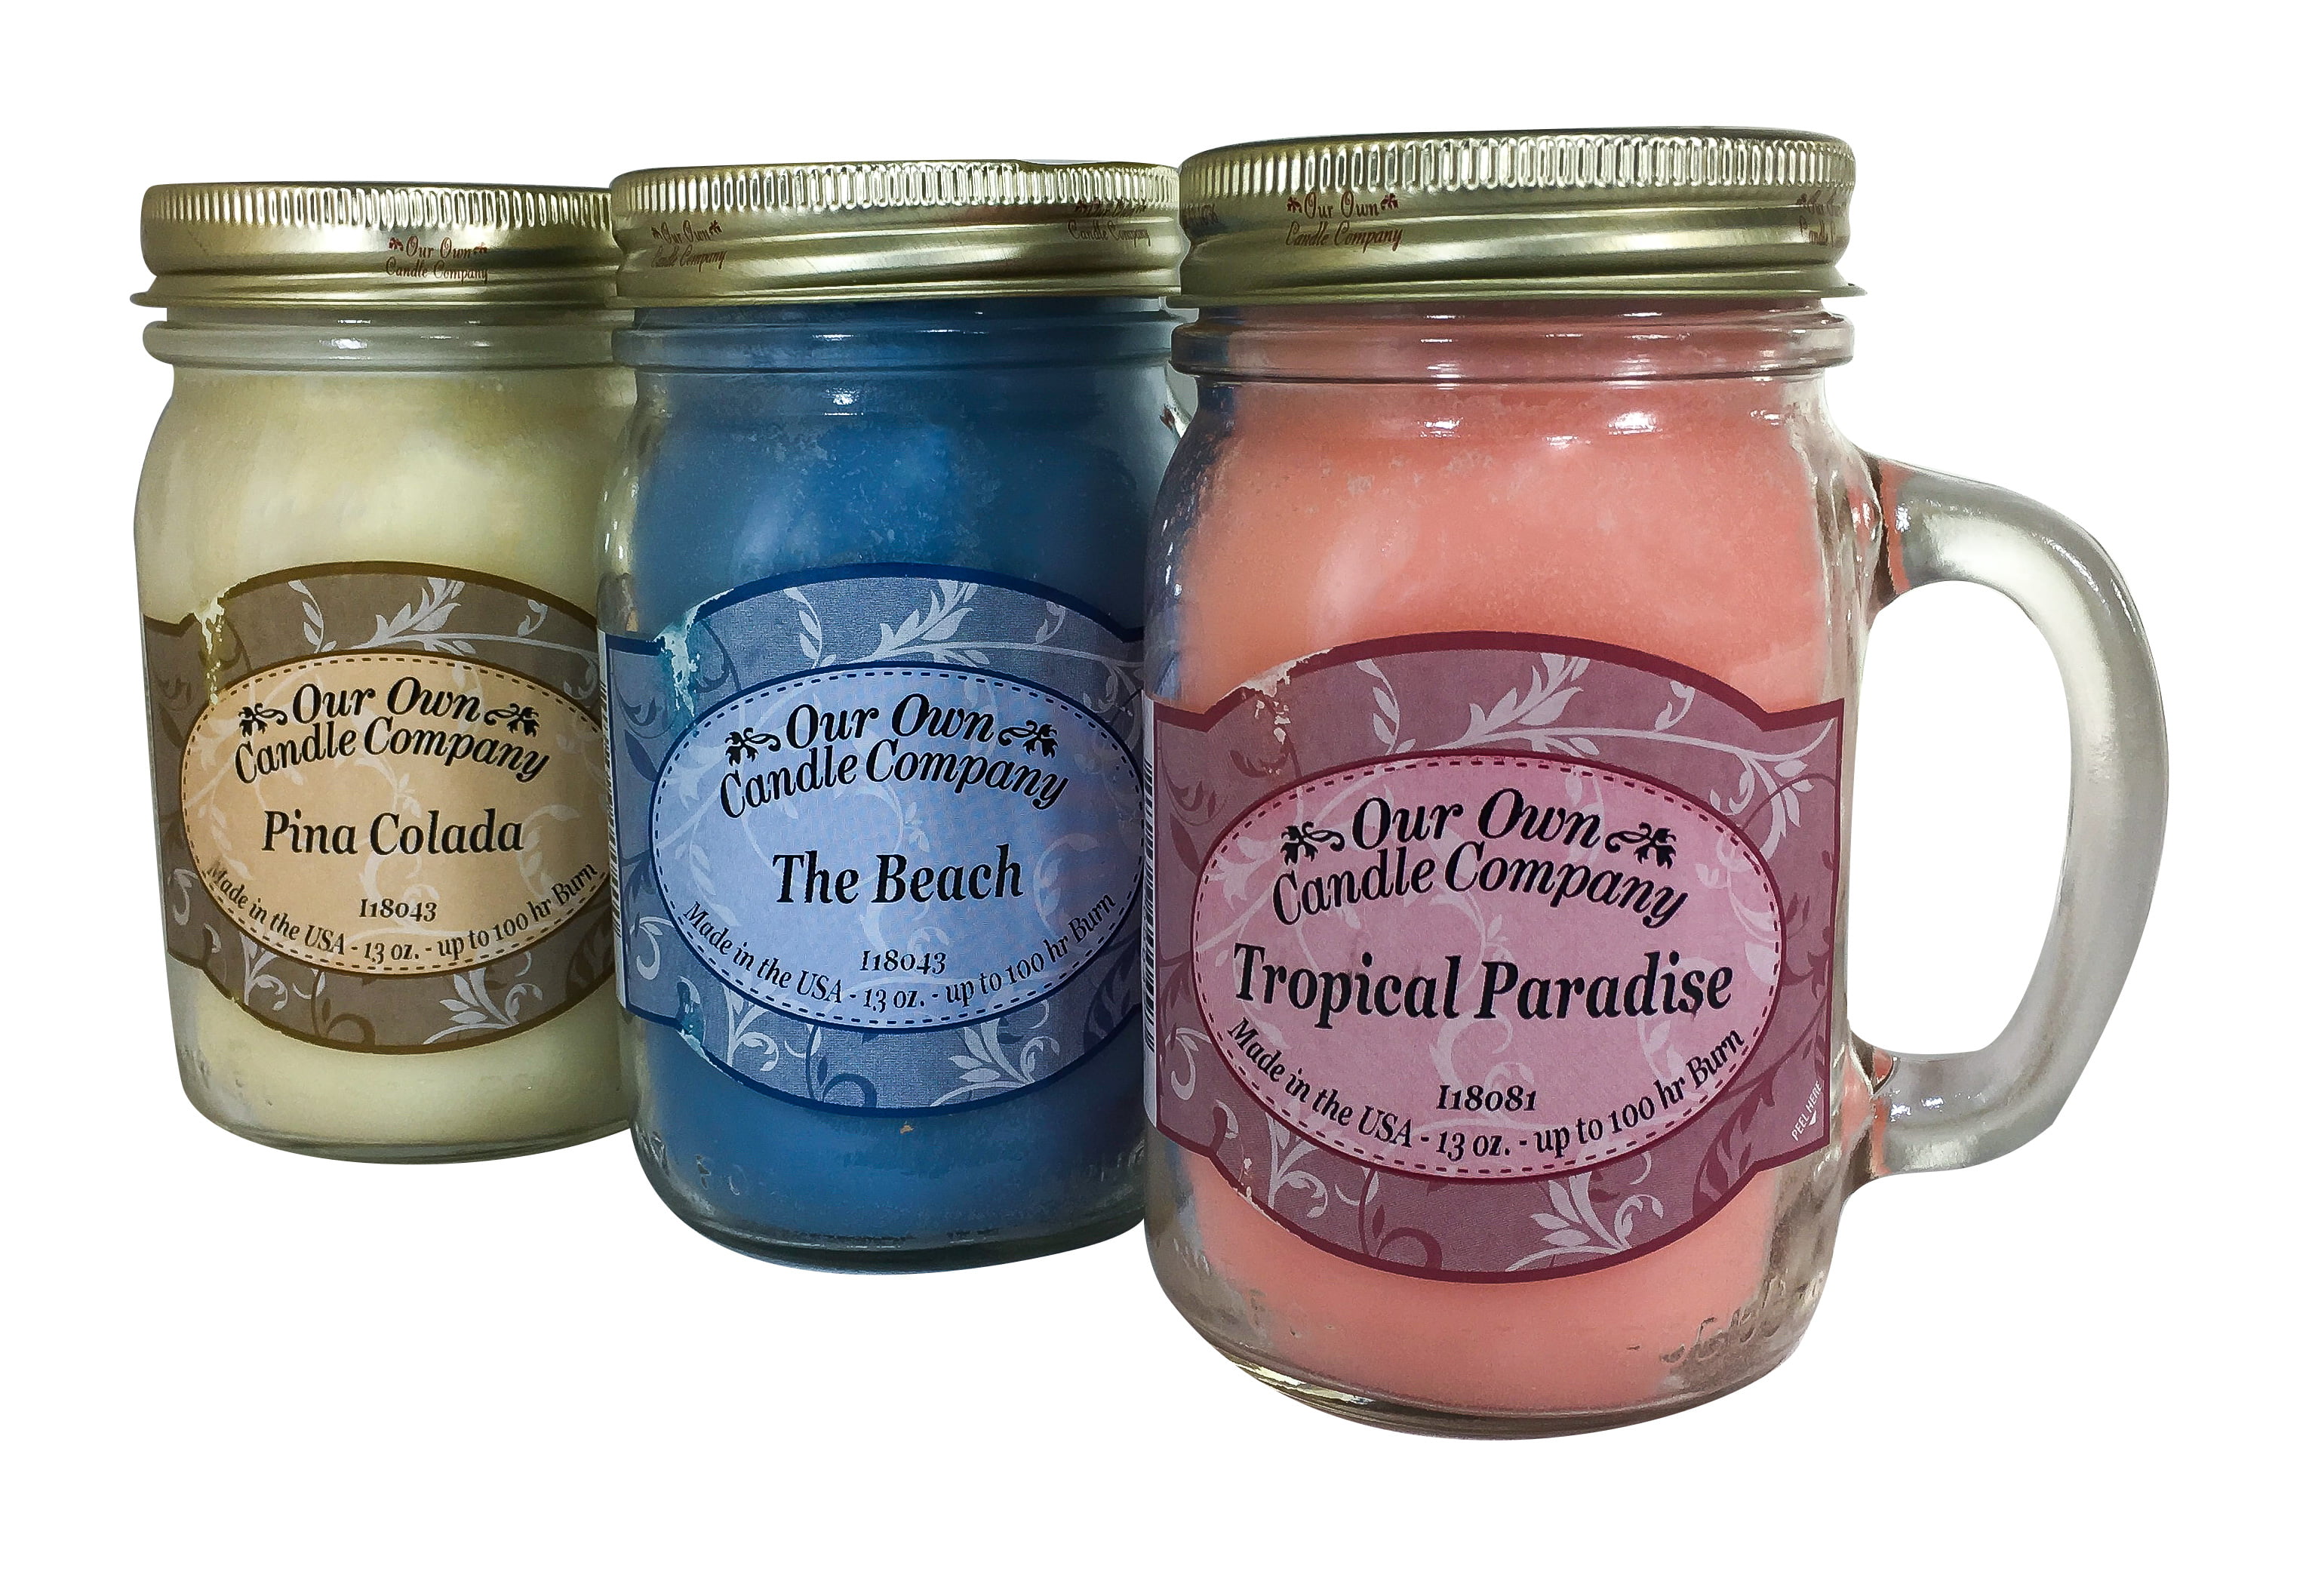 Pina Colada Scented Candle in 13 oz Mason Jar by Our Own Candle Company 